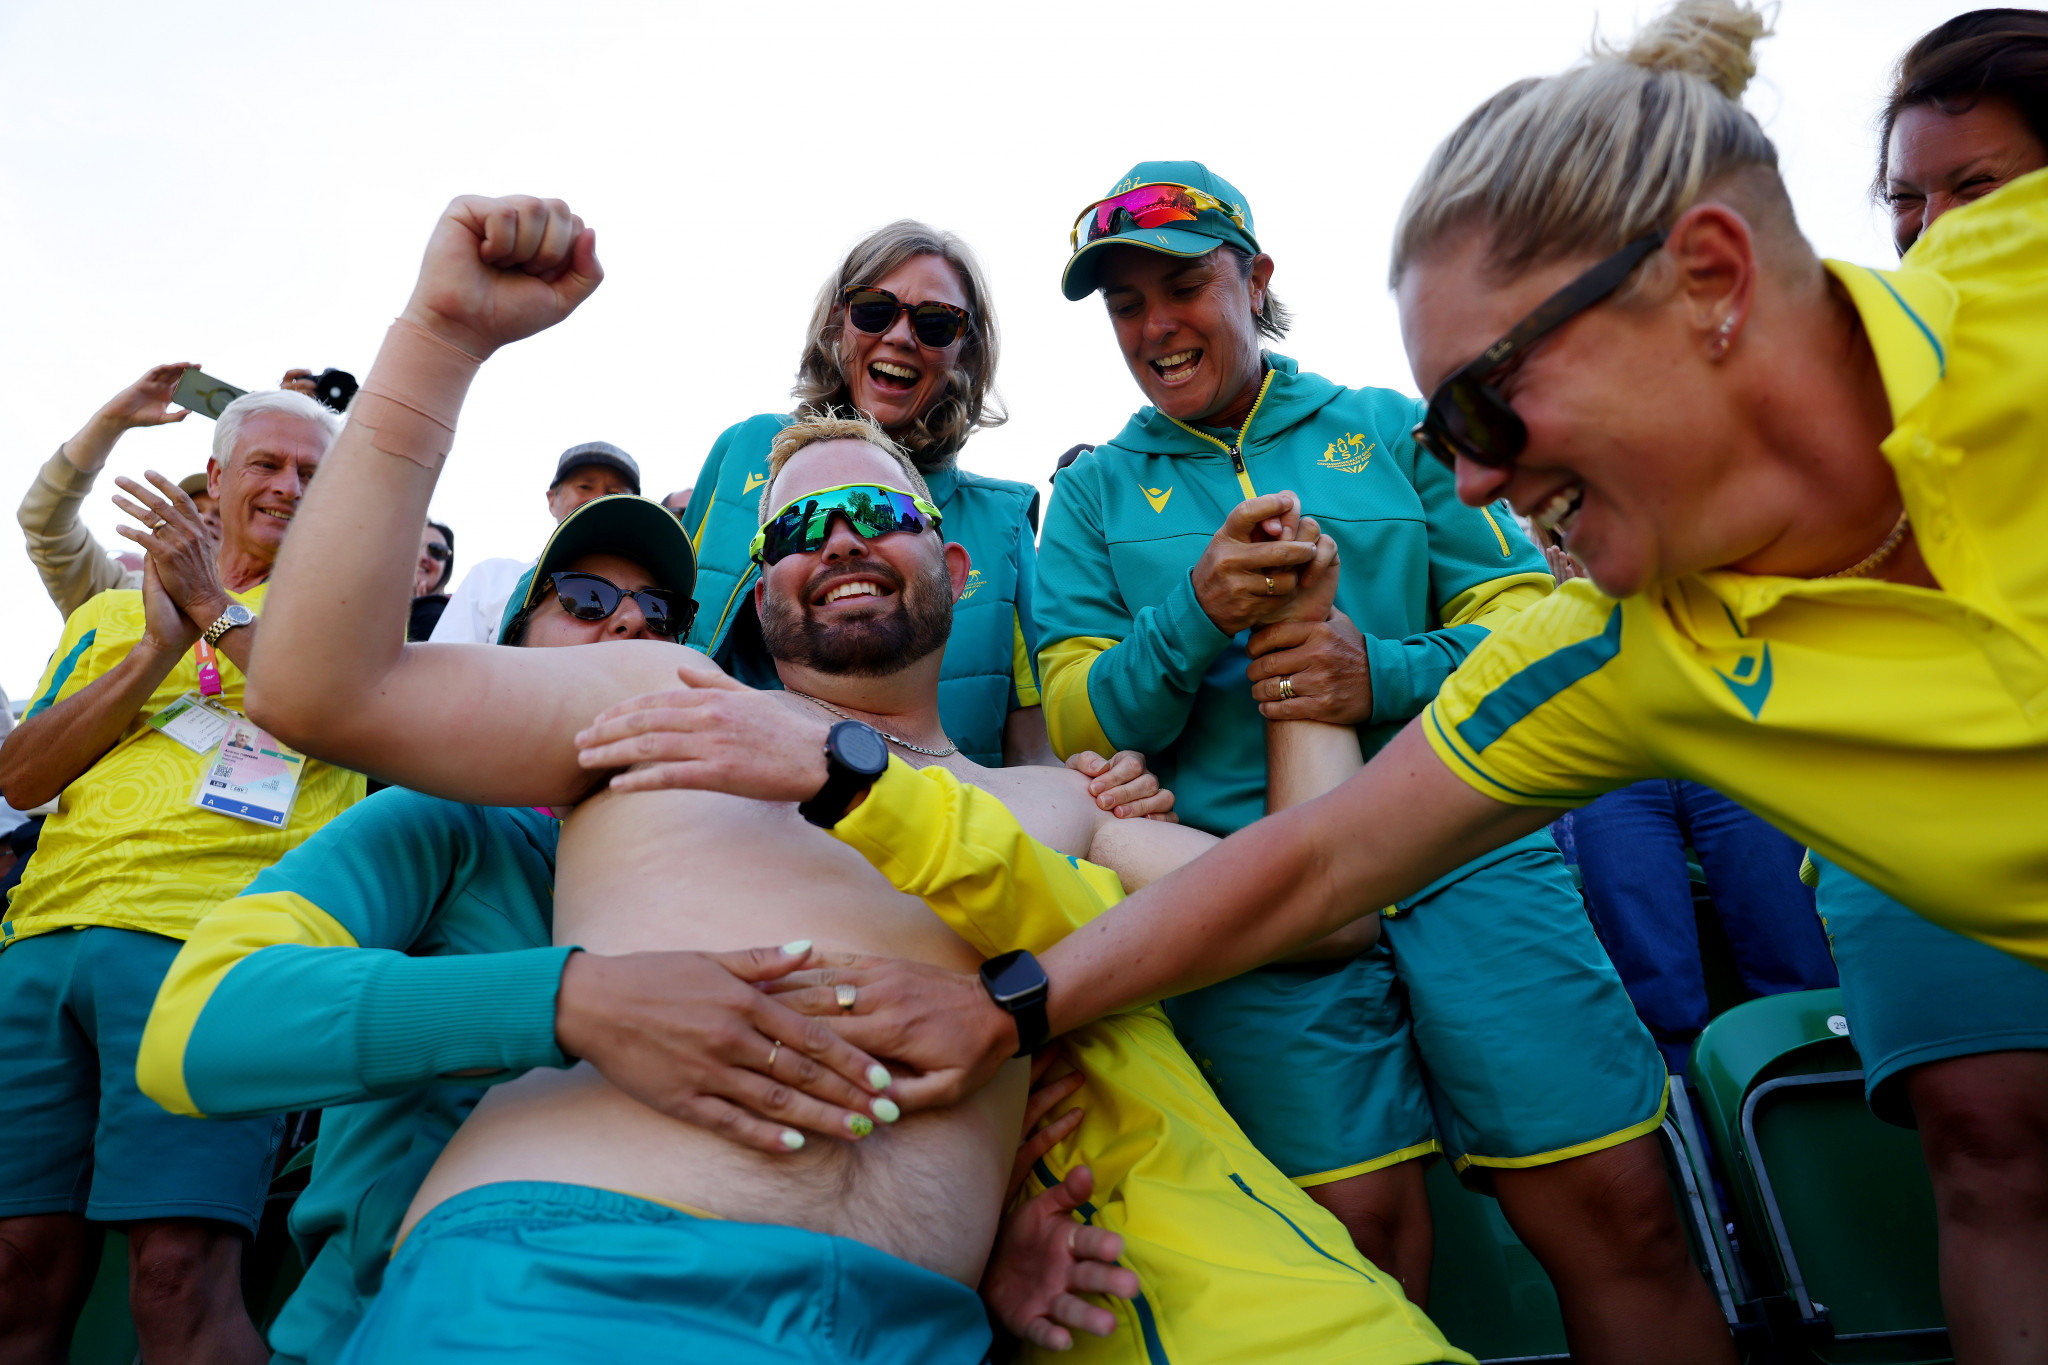 A topless Aaron Wilson receives congratulatory pats on the tummy from Australian staff as he celebrates his men's singles lawn bowls gold ©Getty Images